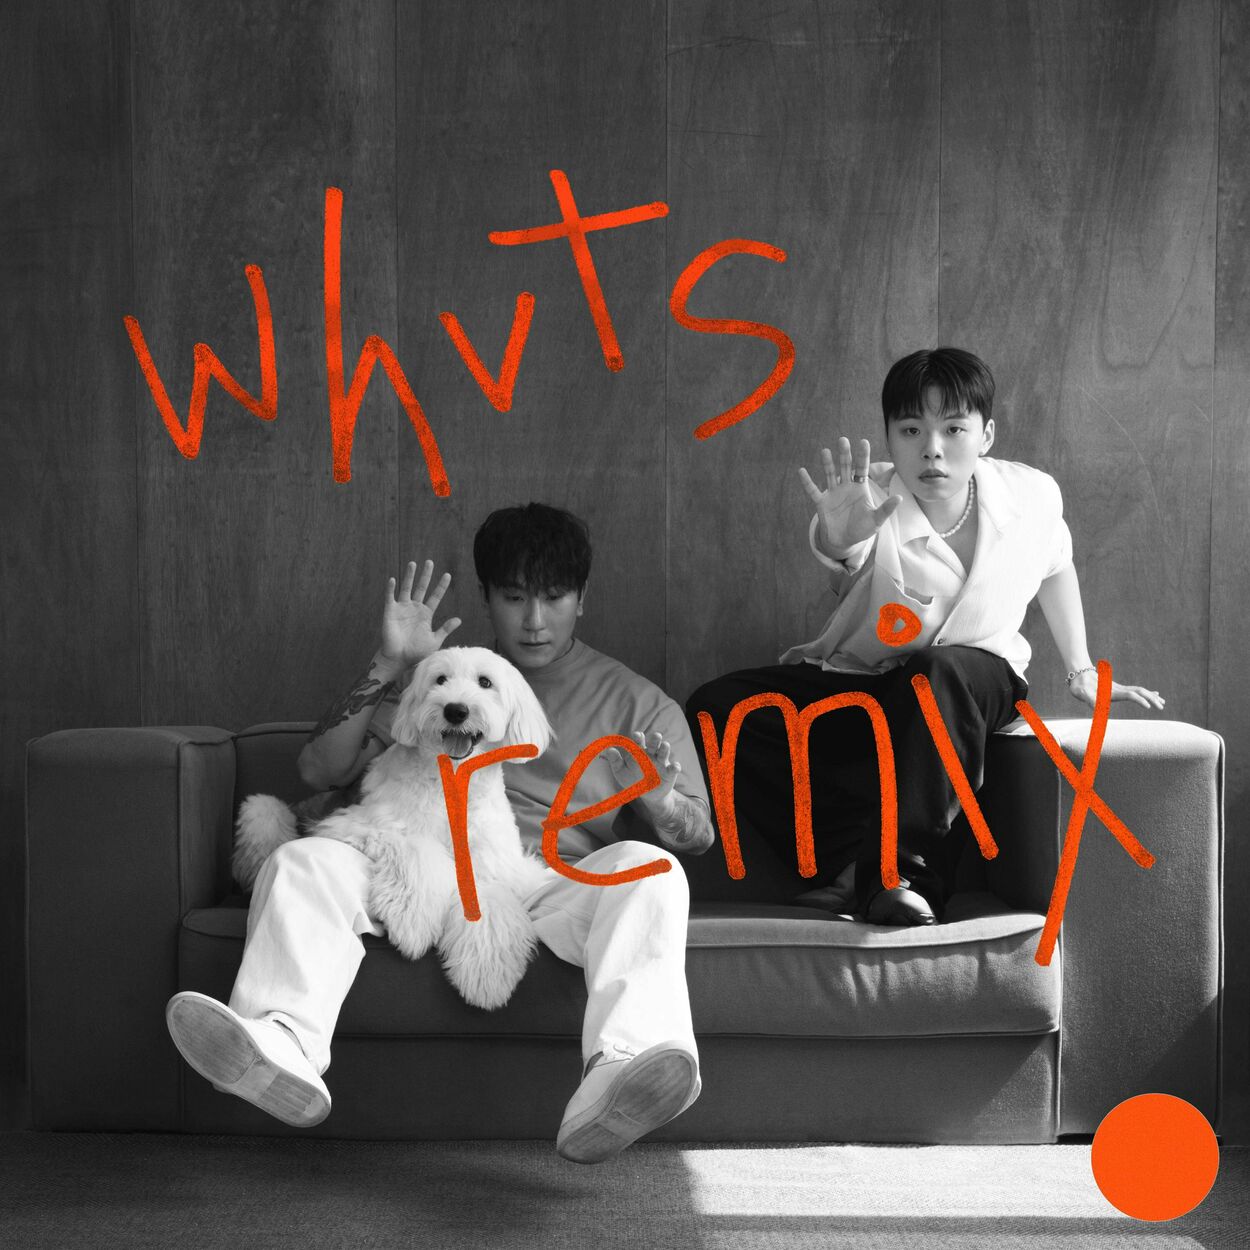 whvts – Wait A Minute ! (whvts Remix) (Feat. 황세현 (h3hyeon)) – Single